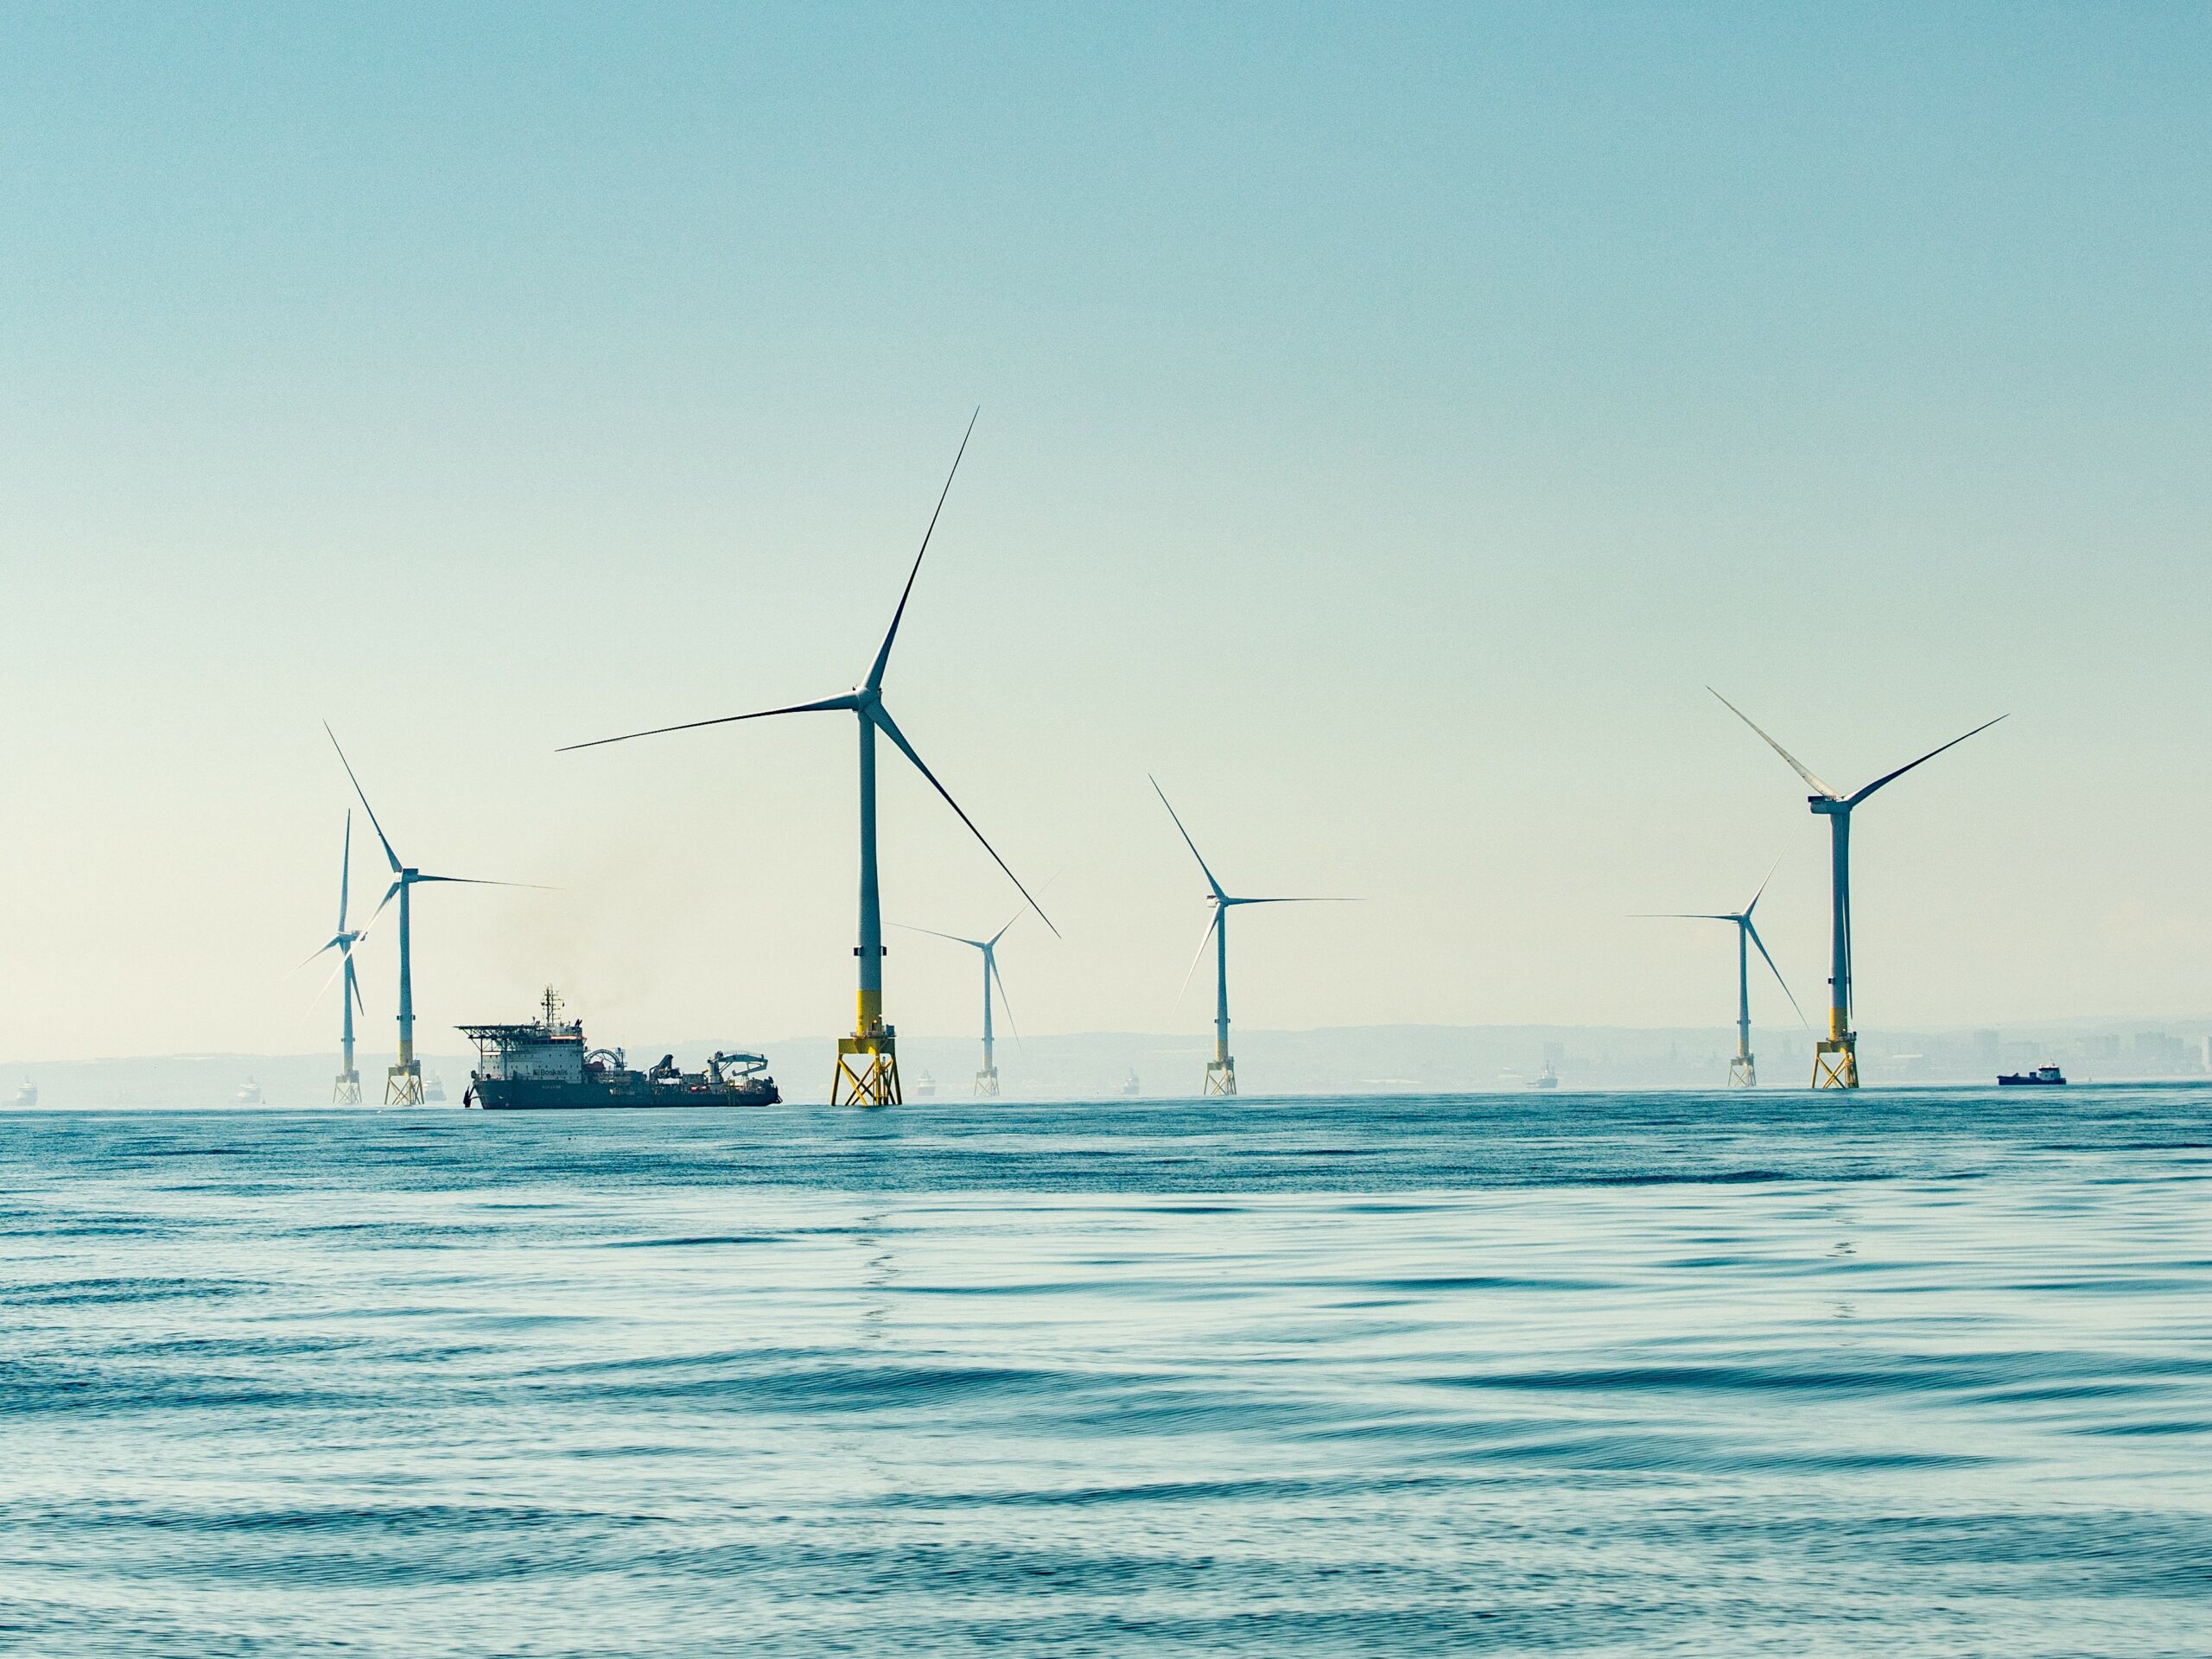 A vessel on the horizon surrounded by offshore wind turbines